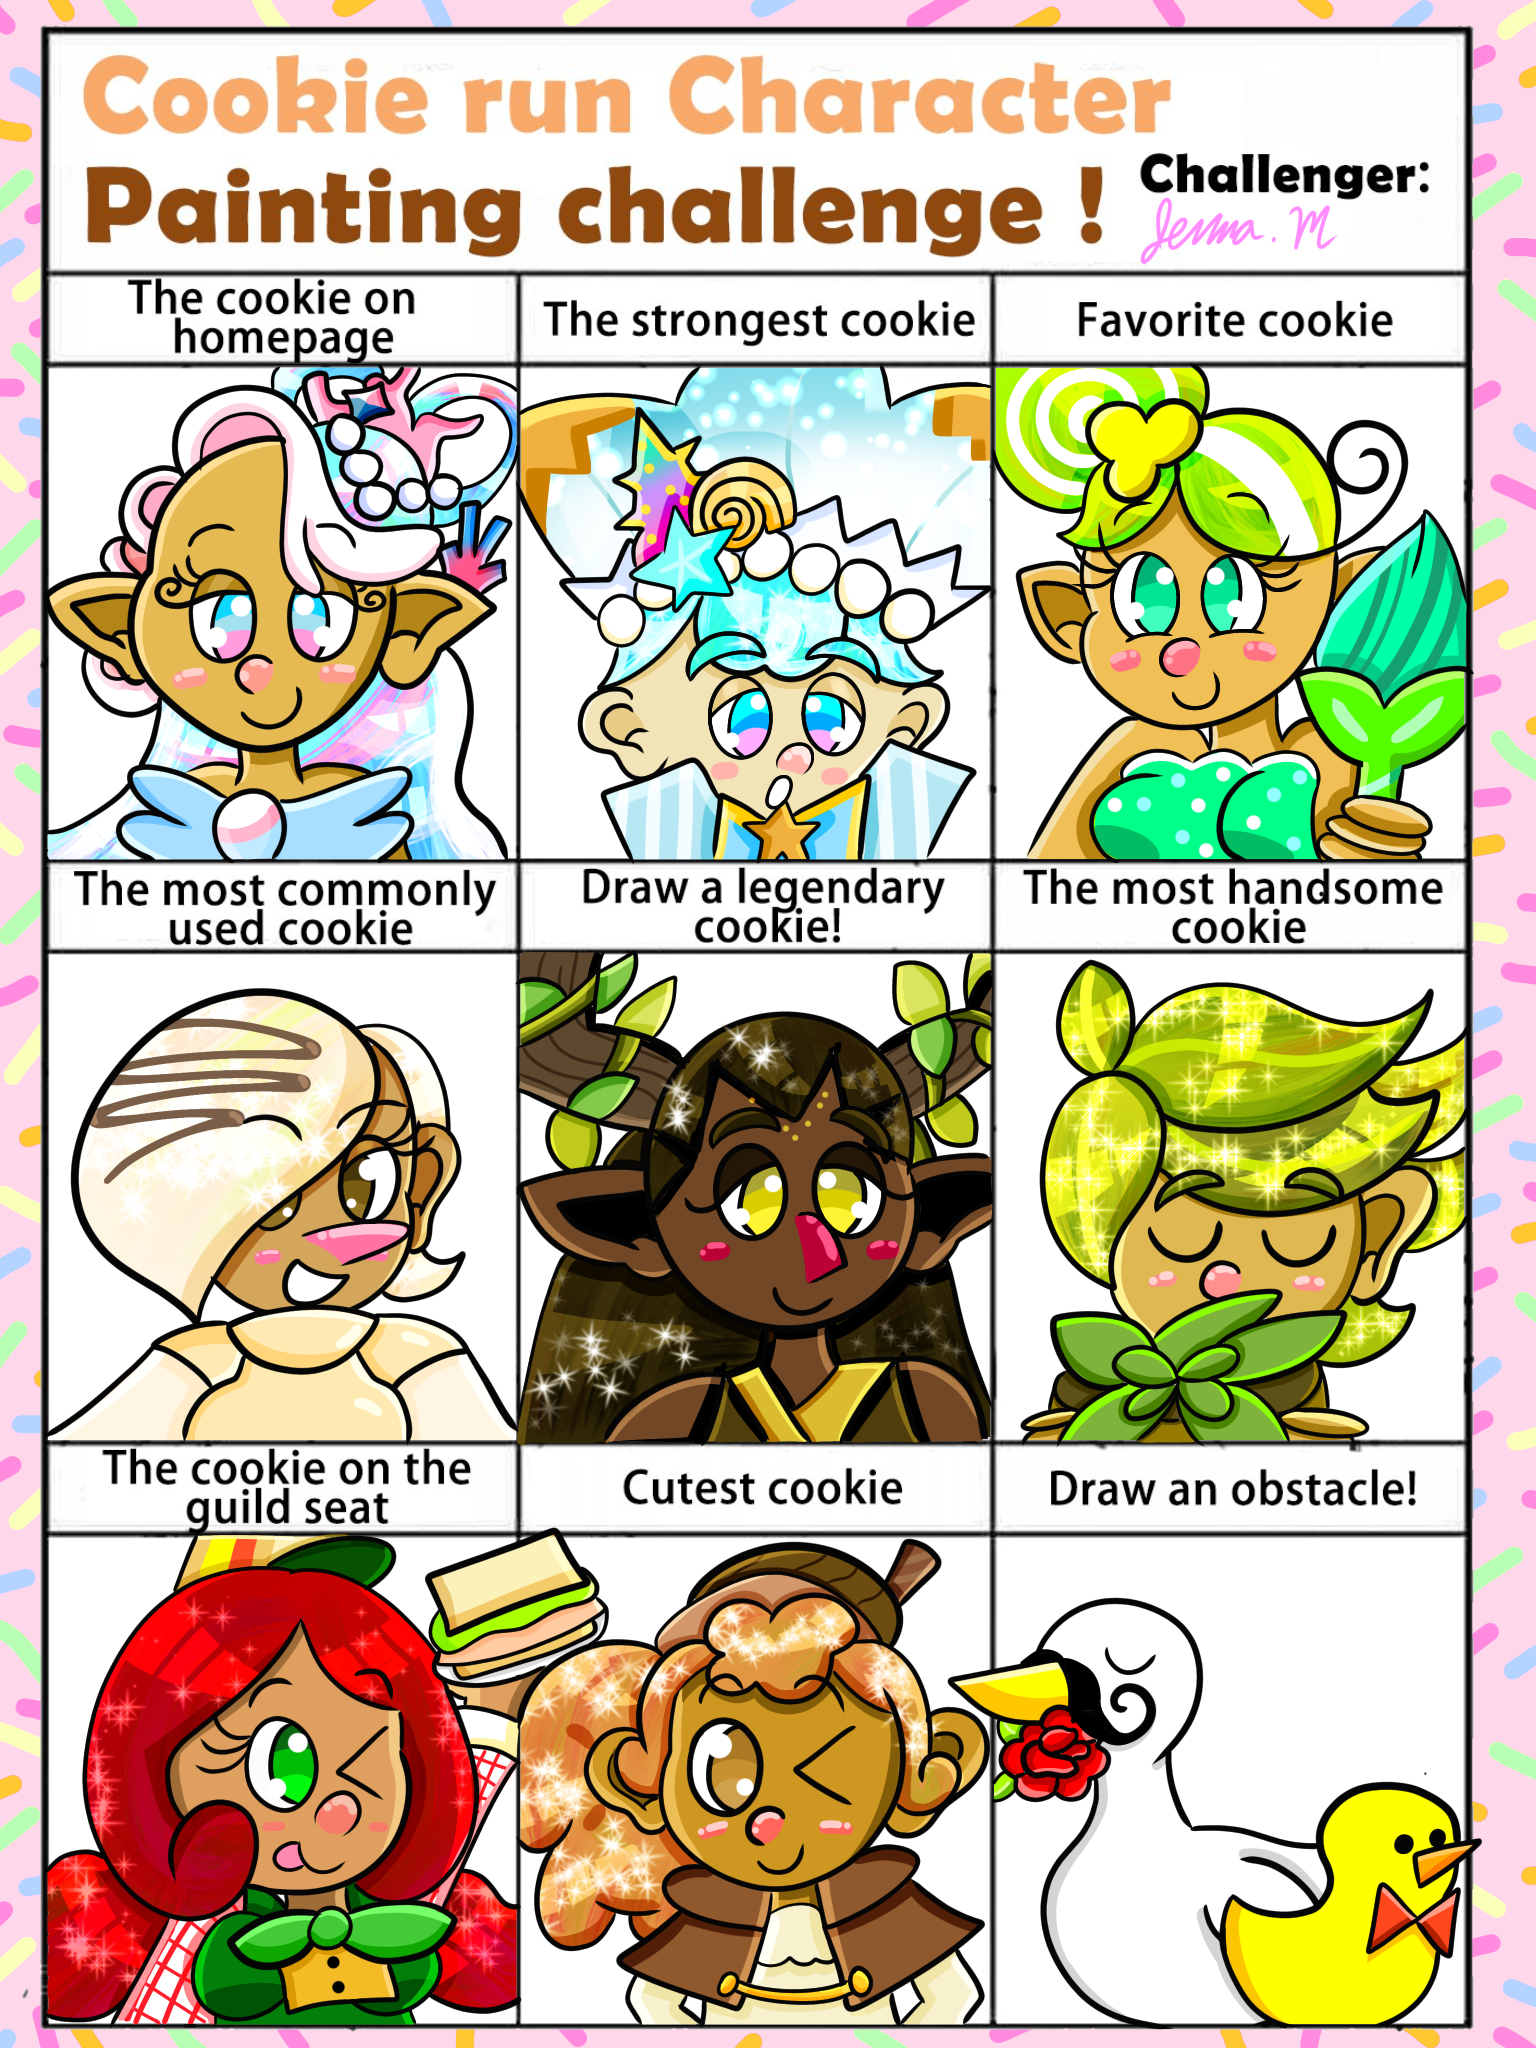 The Cookie Run Character Painting Challenge By Jemibuni On Deviantart